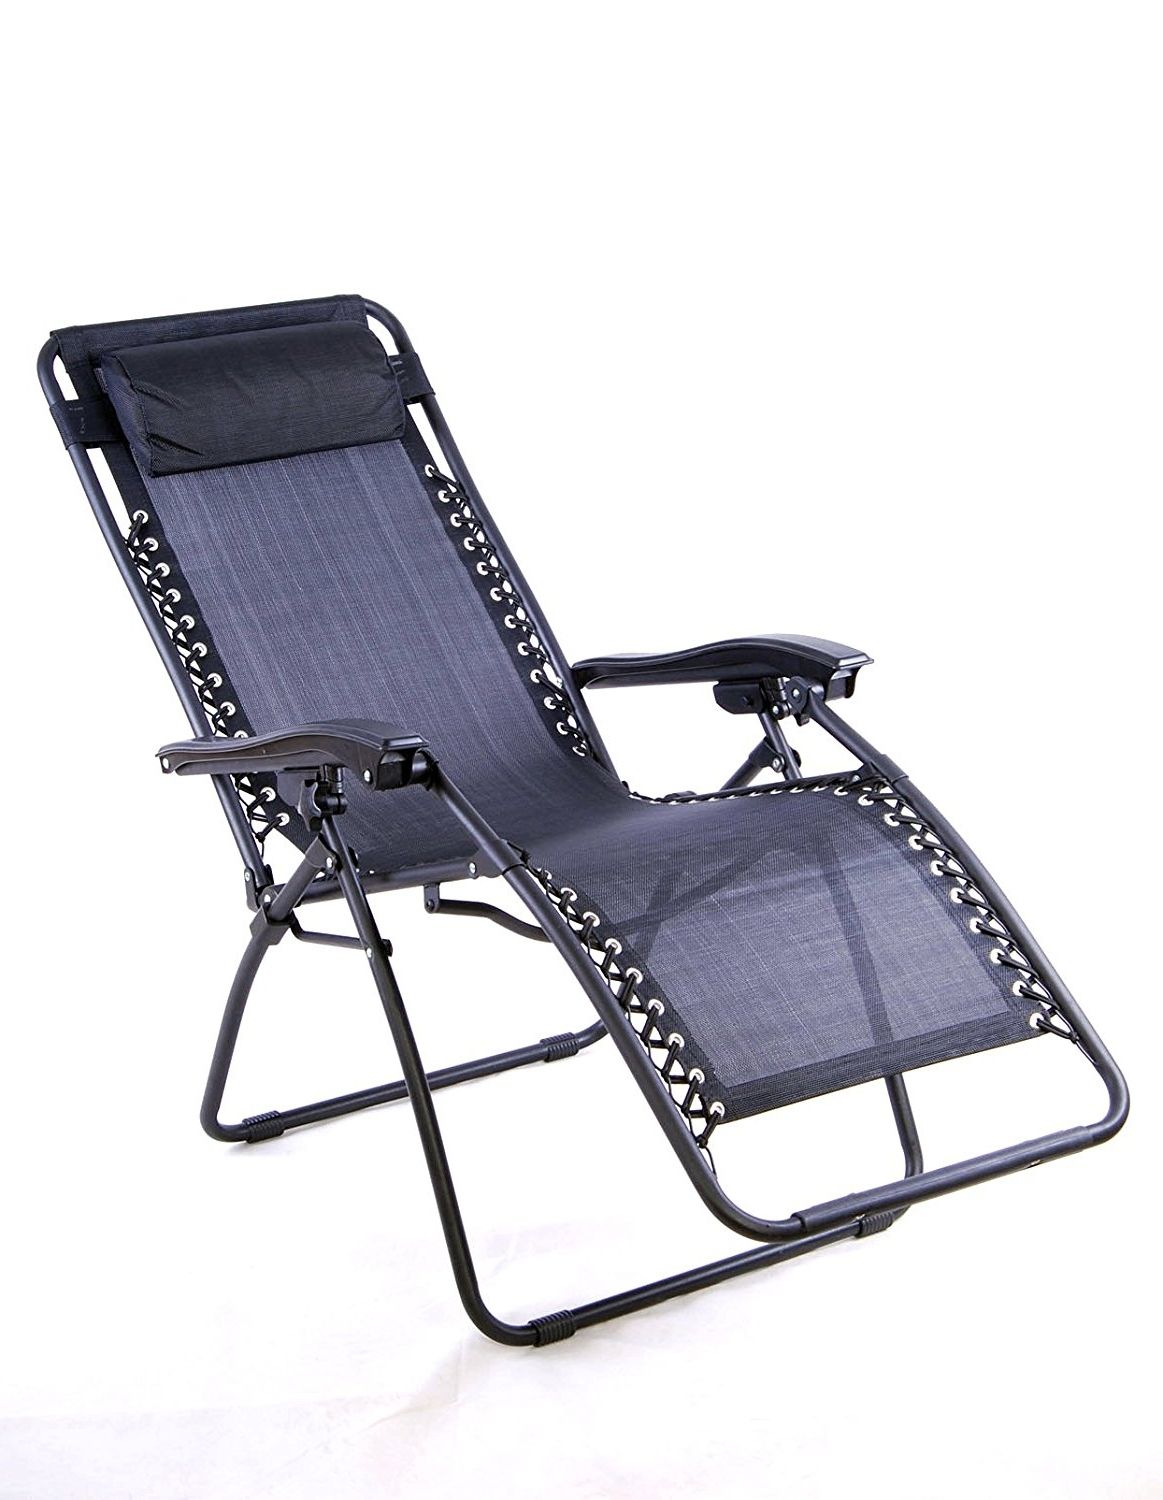 Zero Gravity Chaise Lounge Chairs Throughout 2018 Amazon : Anti Gravity Chair, Zero Gravity Chair, Super (View 6 of 15)